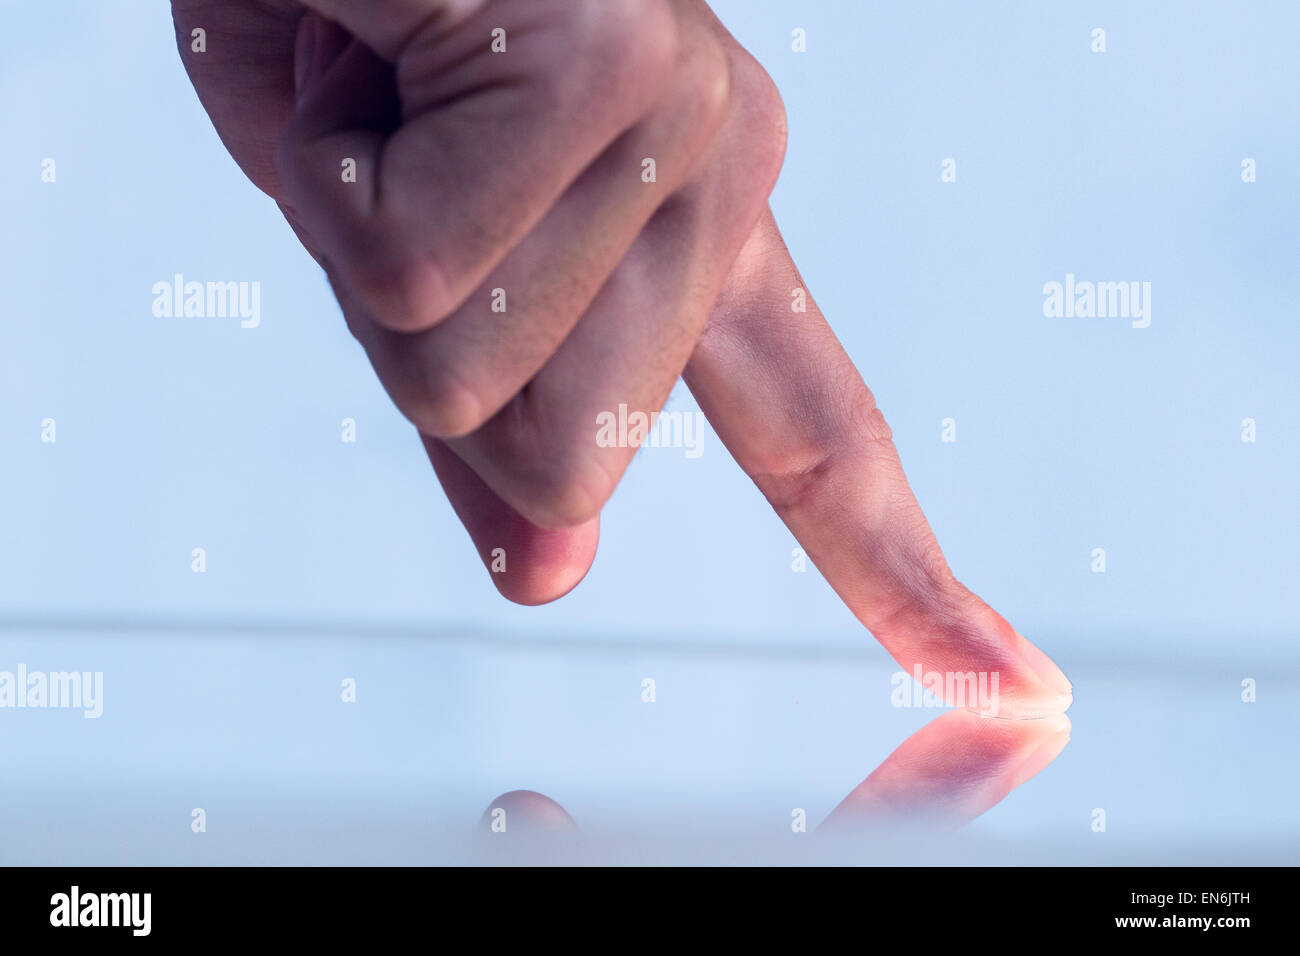 Man pointing on reflective surface Stock Photo